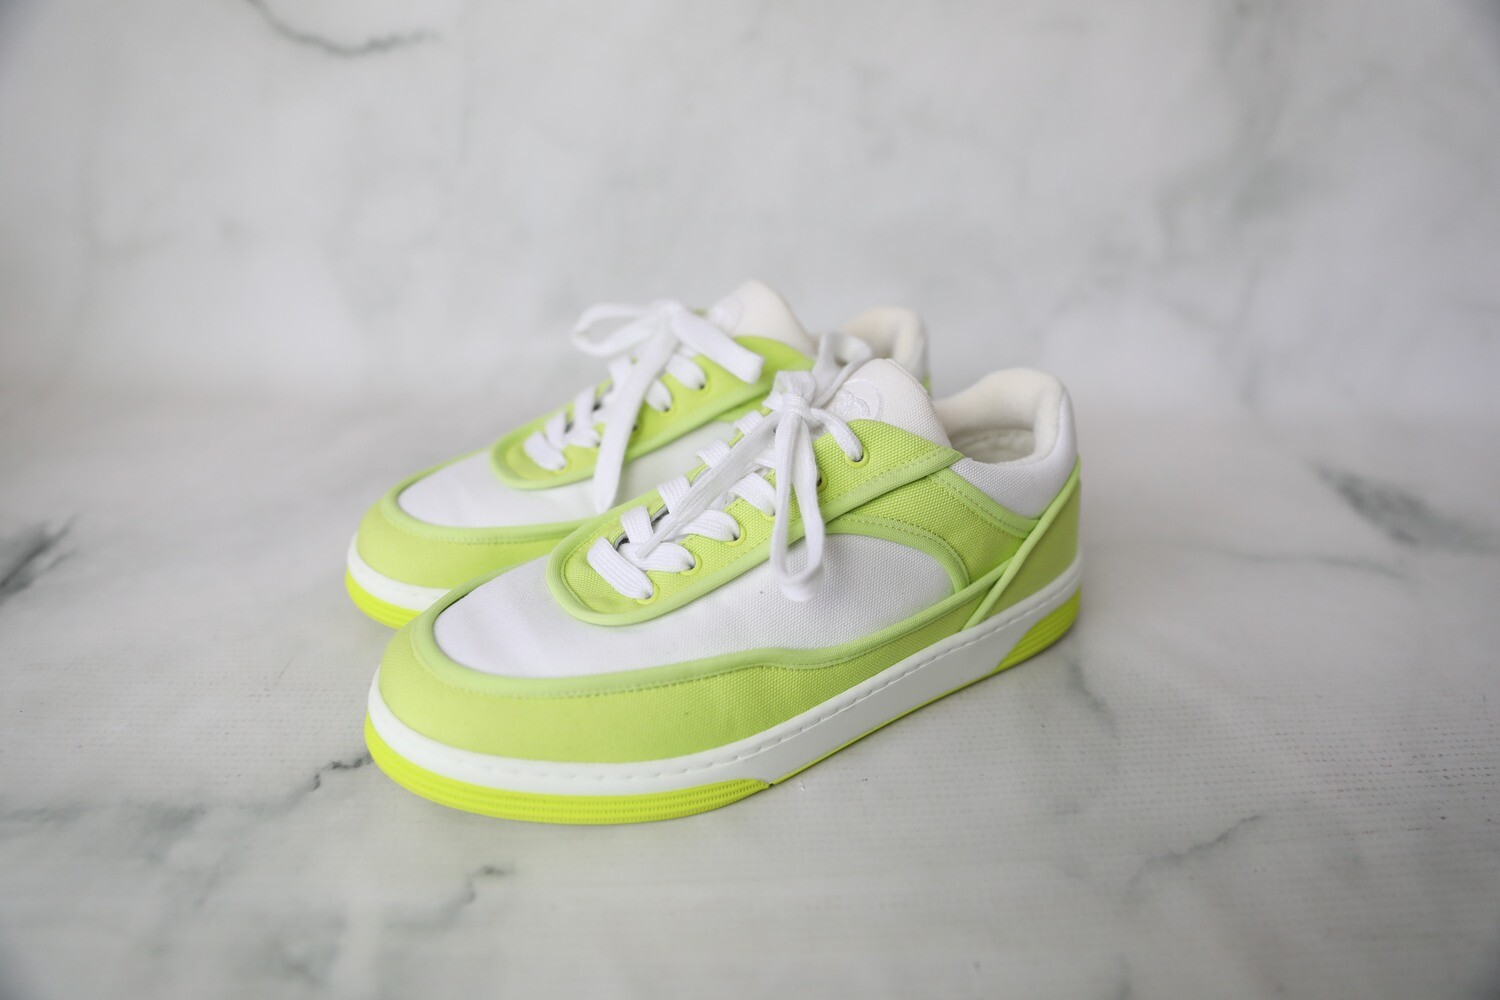 Chanel Shoes Sneakers, White and Neon Green, Size 36.5, New in Dustbag WA001